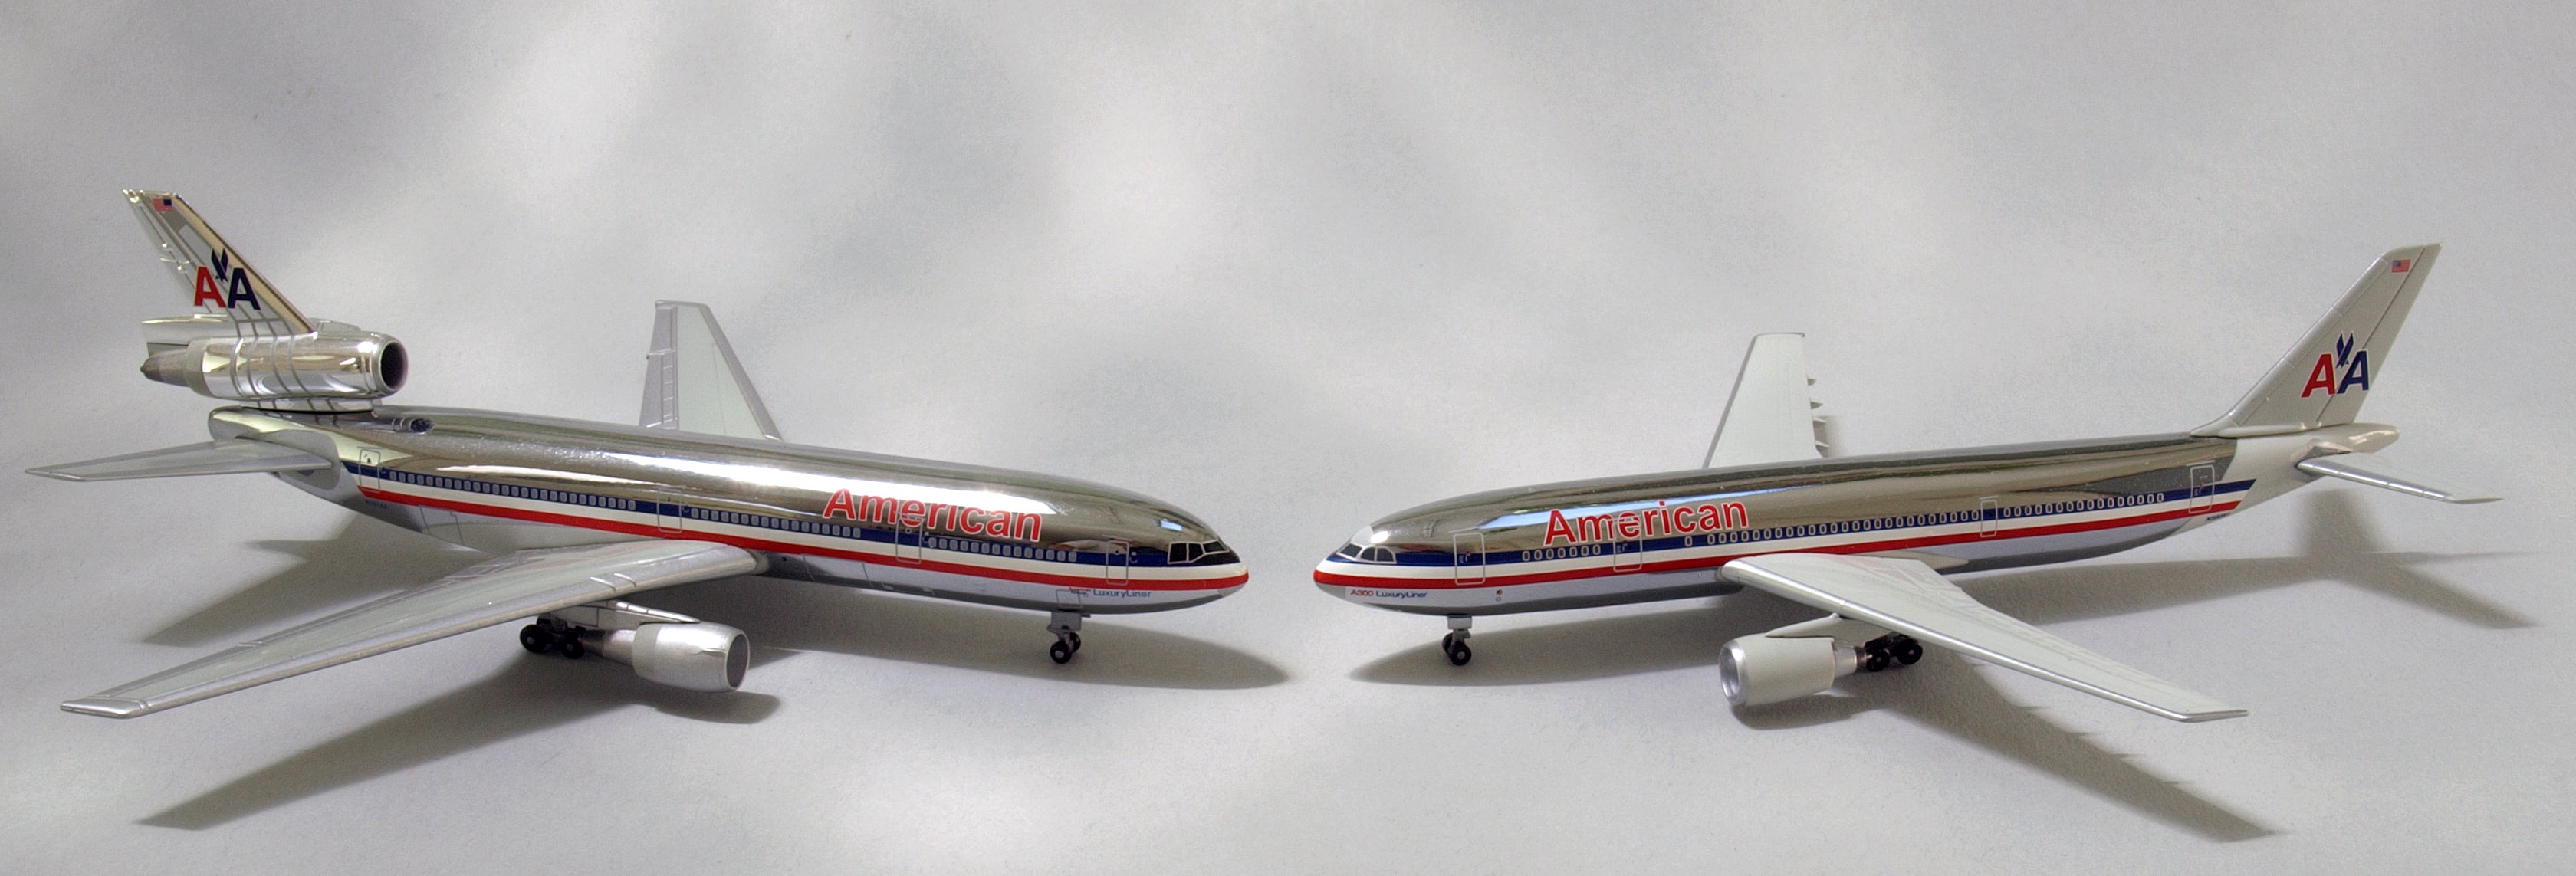 DRAGON WINGS AUSTRIAN Airlines A320 1:400 Diecast Commercial Plane Model 55339 